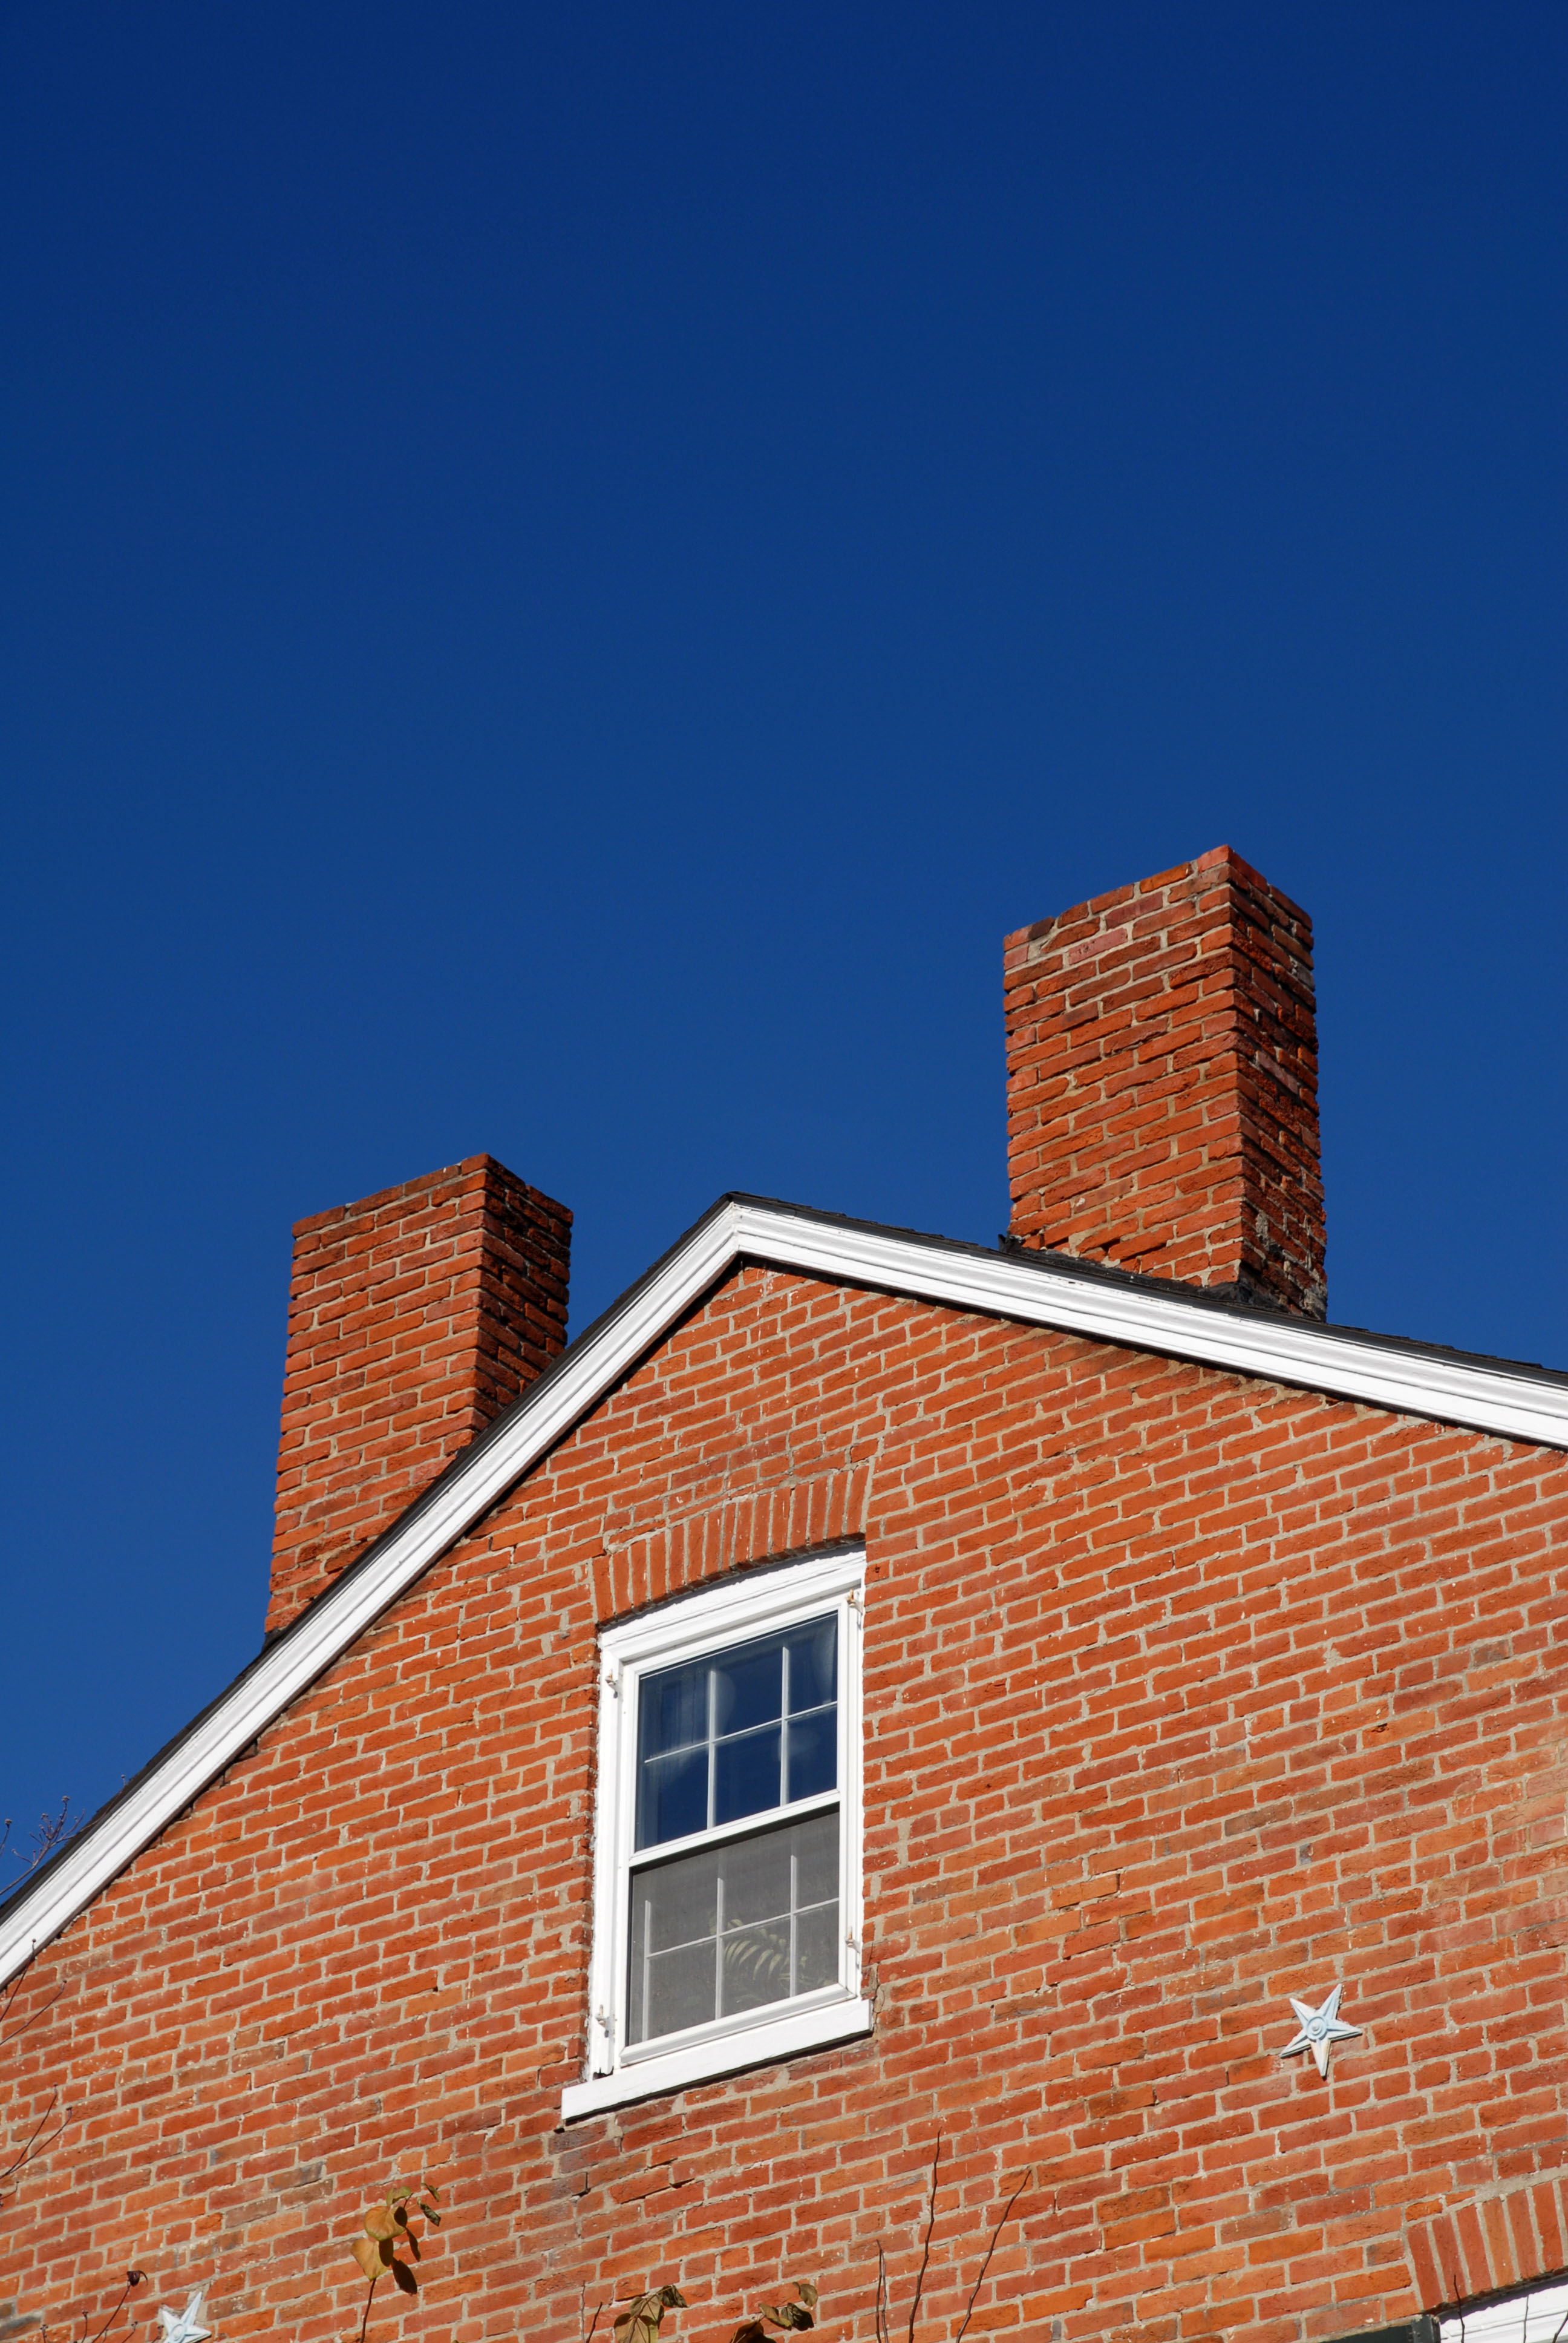 images/chimney_double_roof.jpg